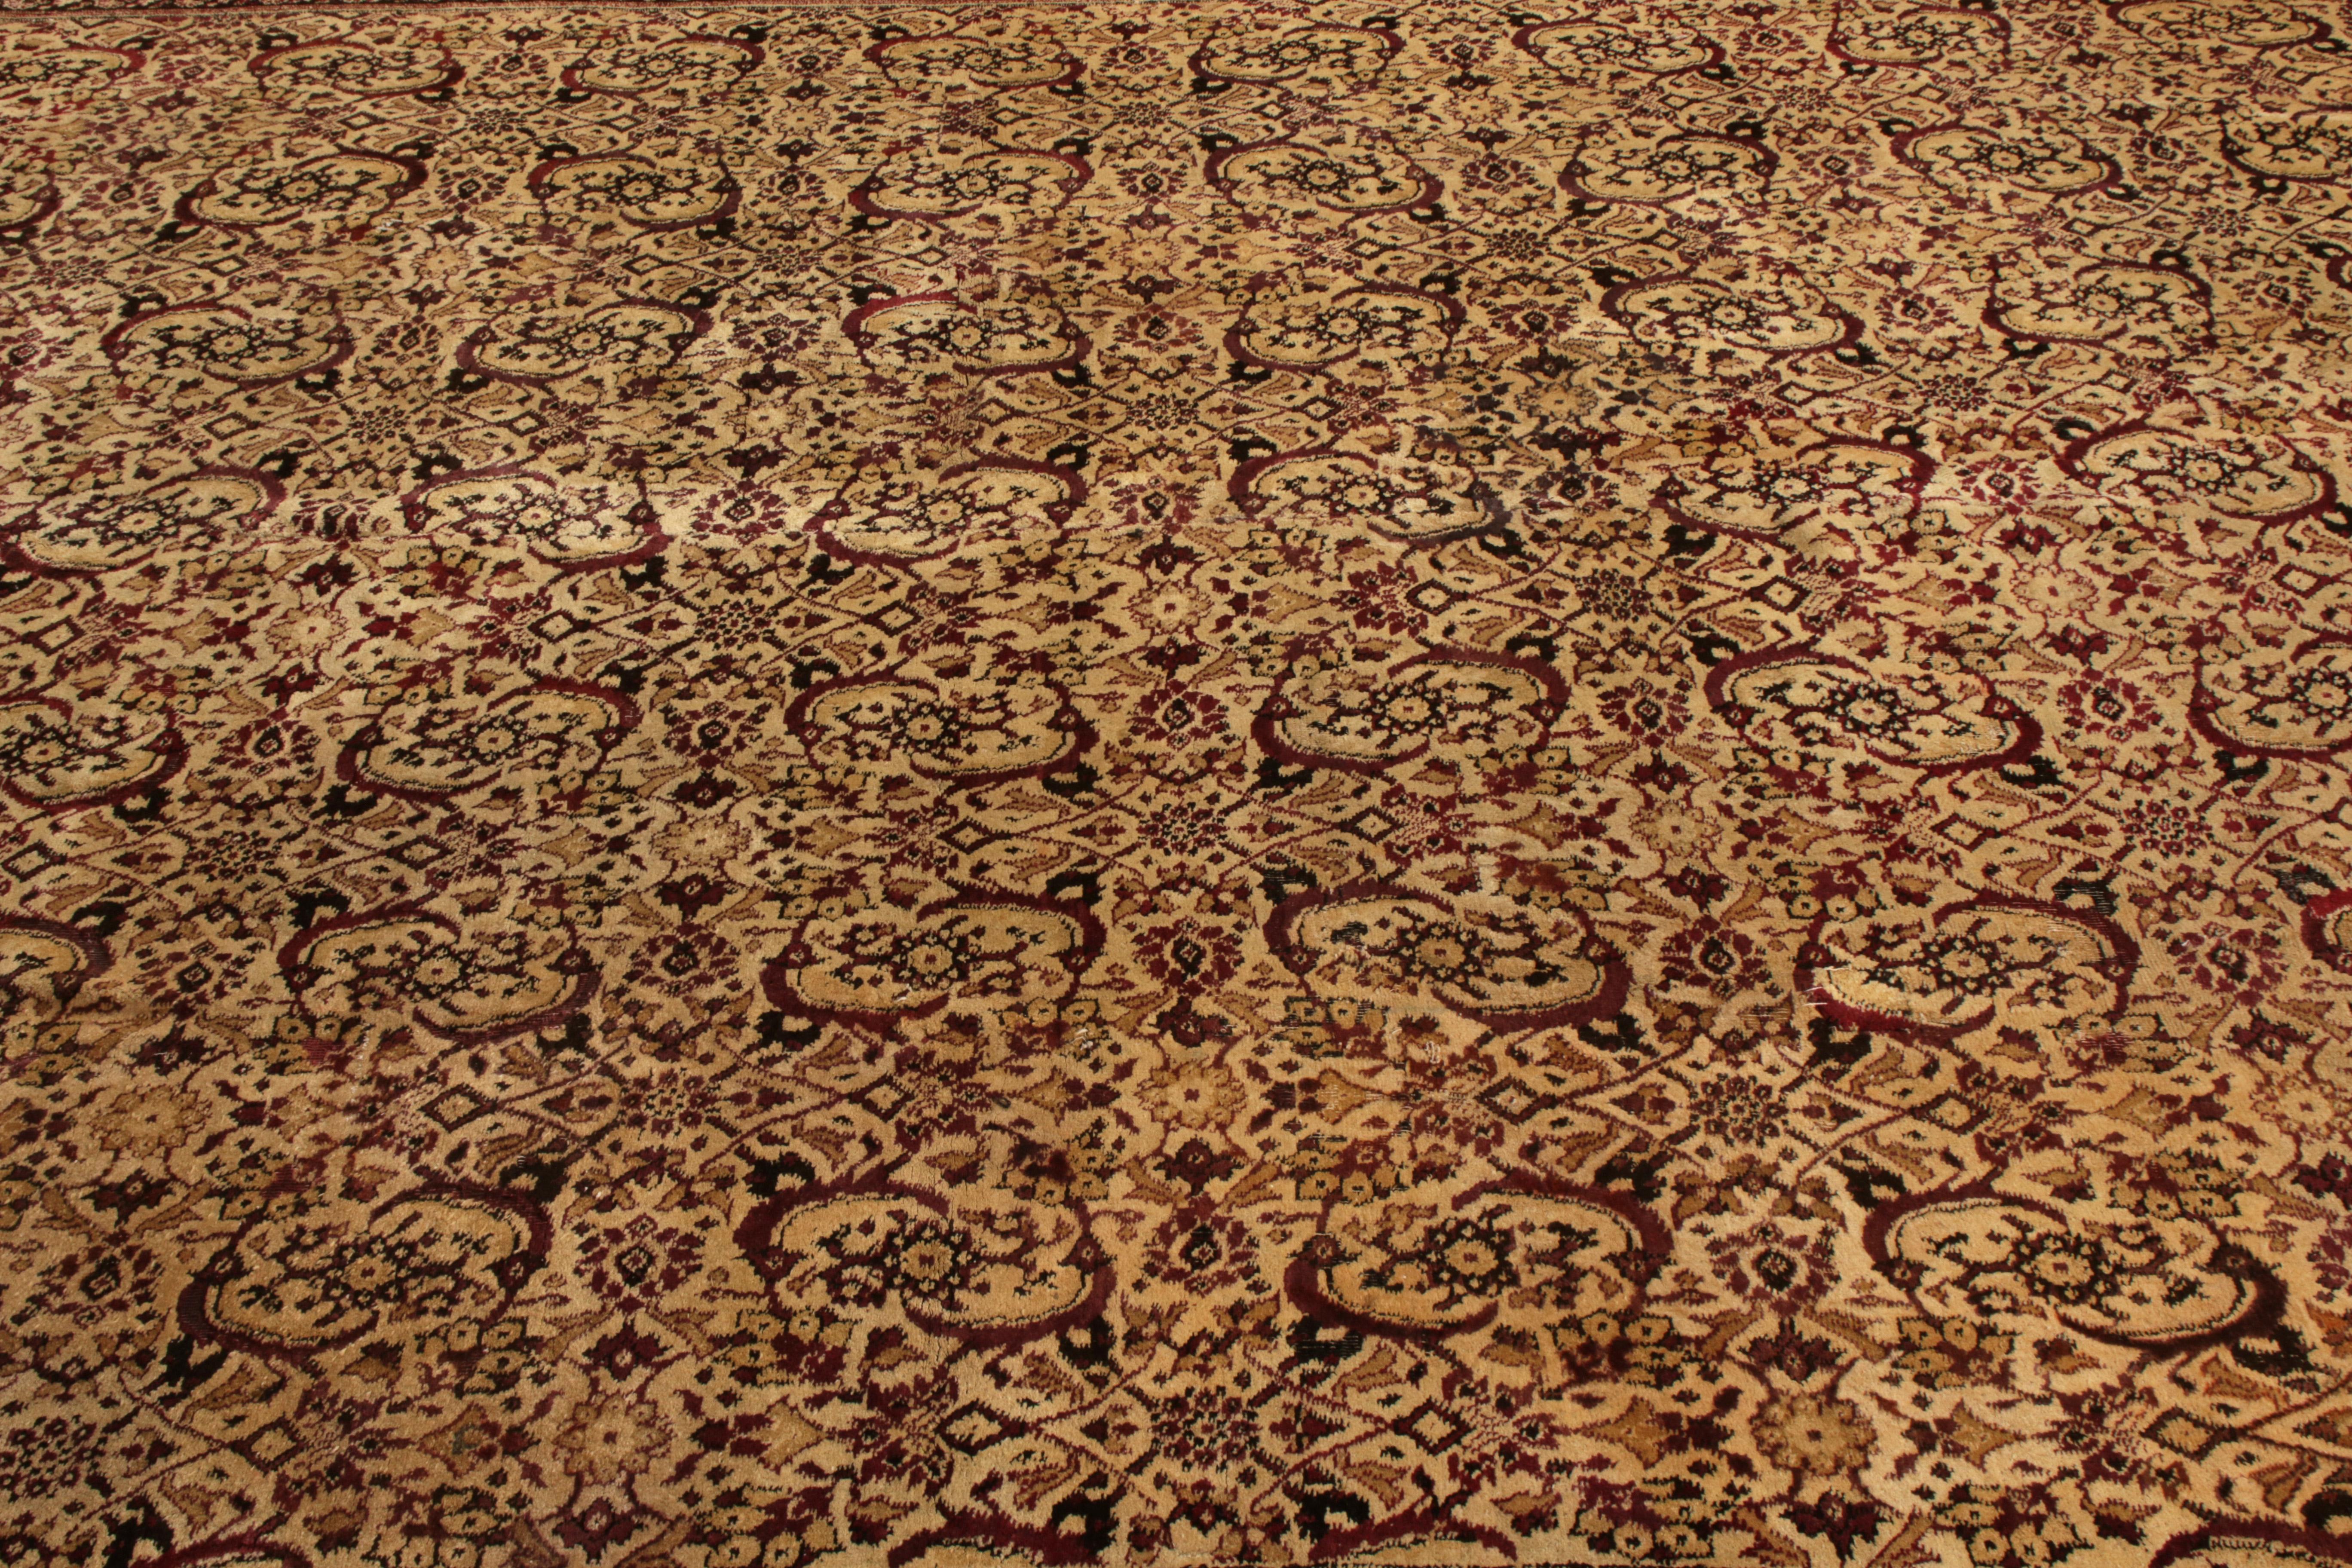 Hand knotted in wool originating from India circa 1880-1890, this 12 x 18 antique rug represents a rare large-size Agra rug of further exceptional color and refined pattern—revered among the most sought-after Classic rug families seldom enjoying